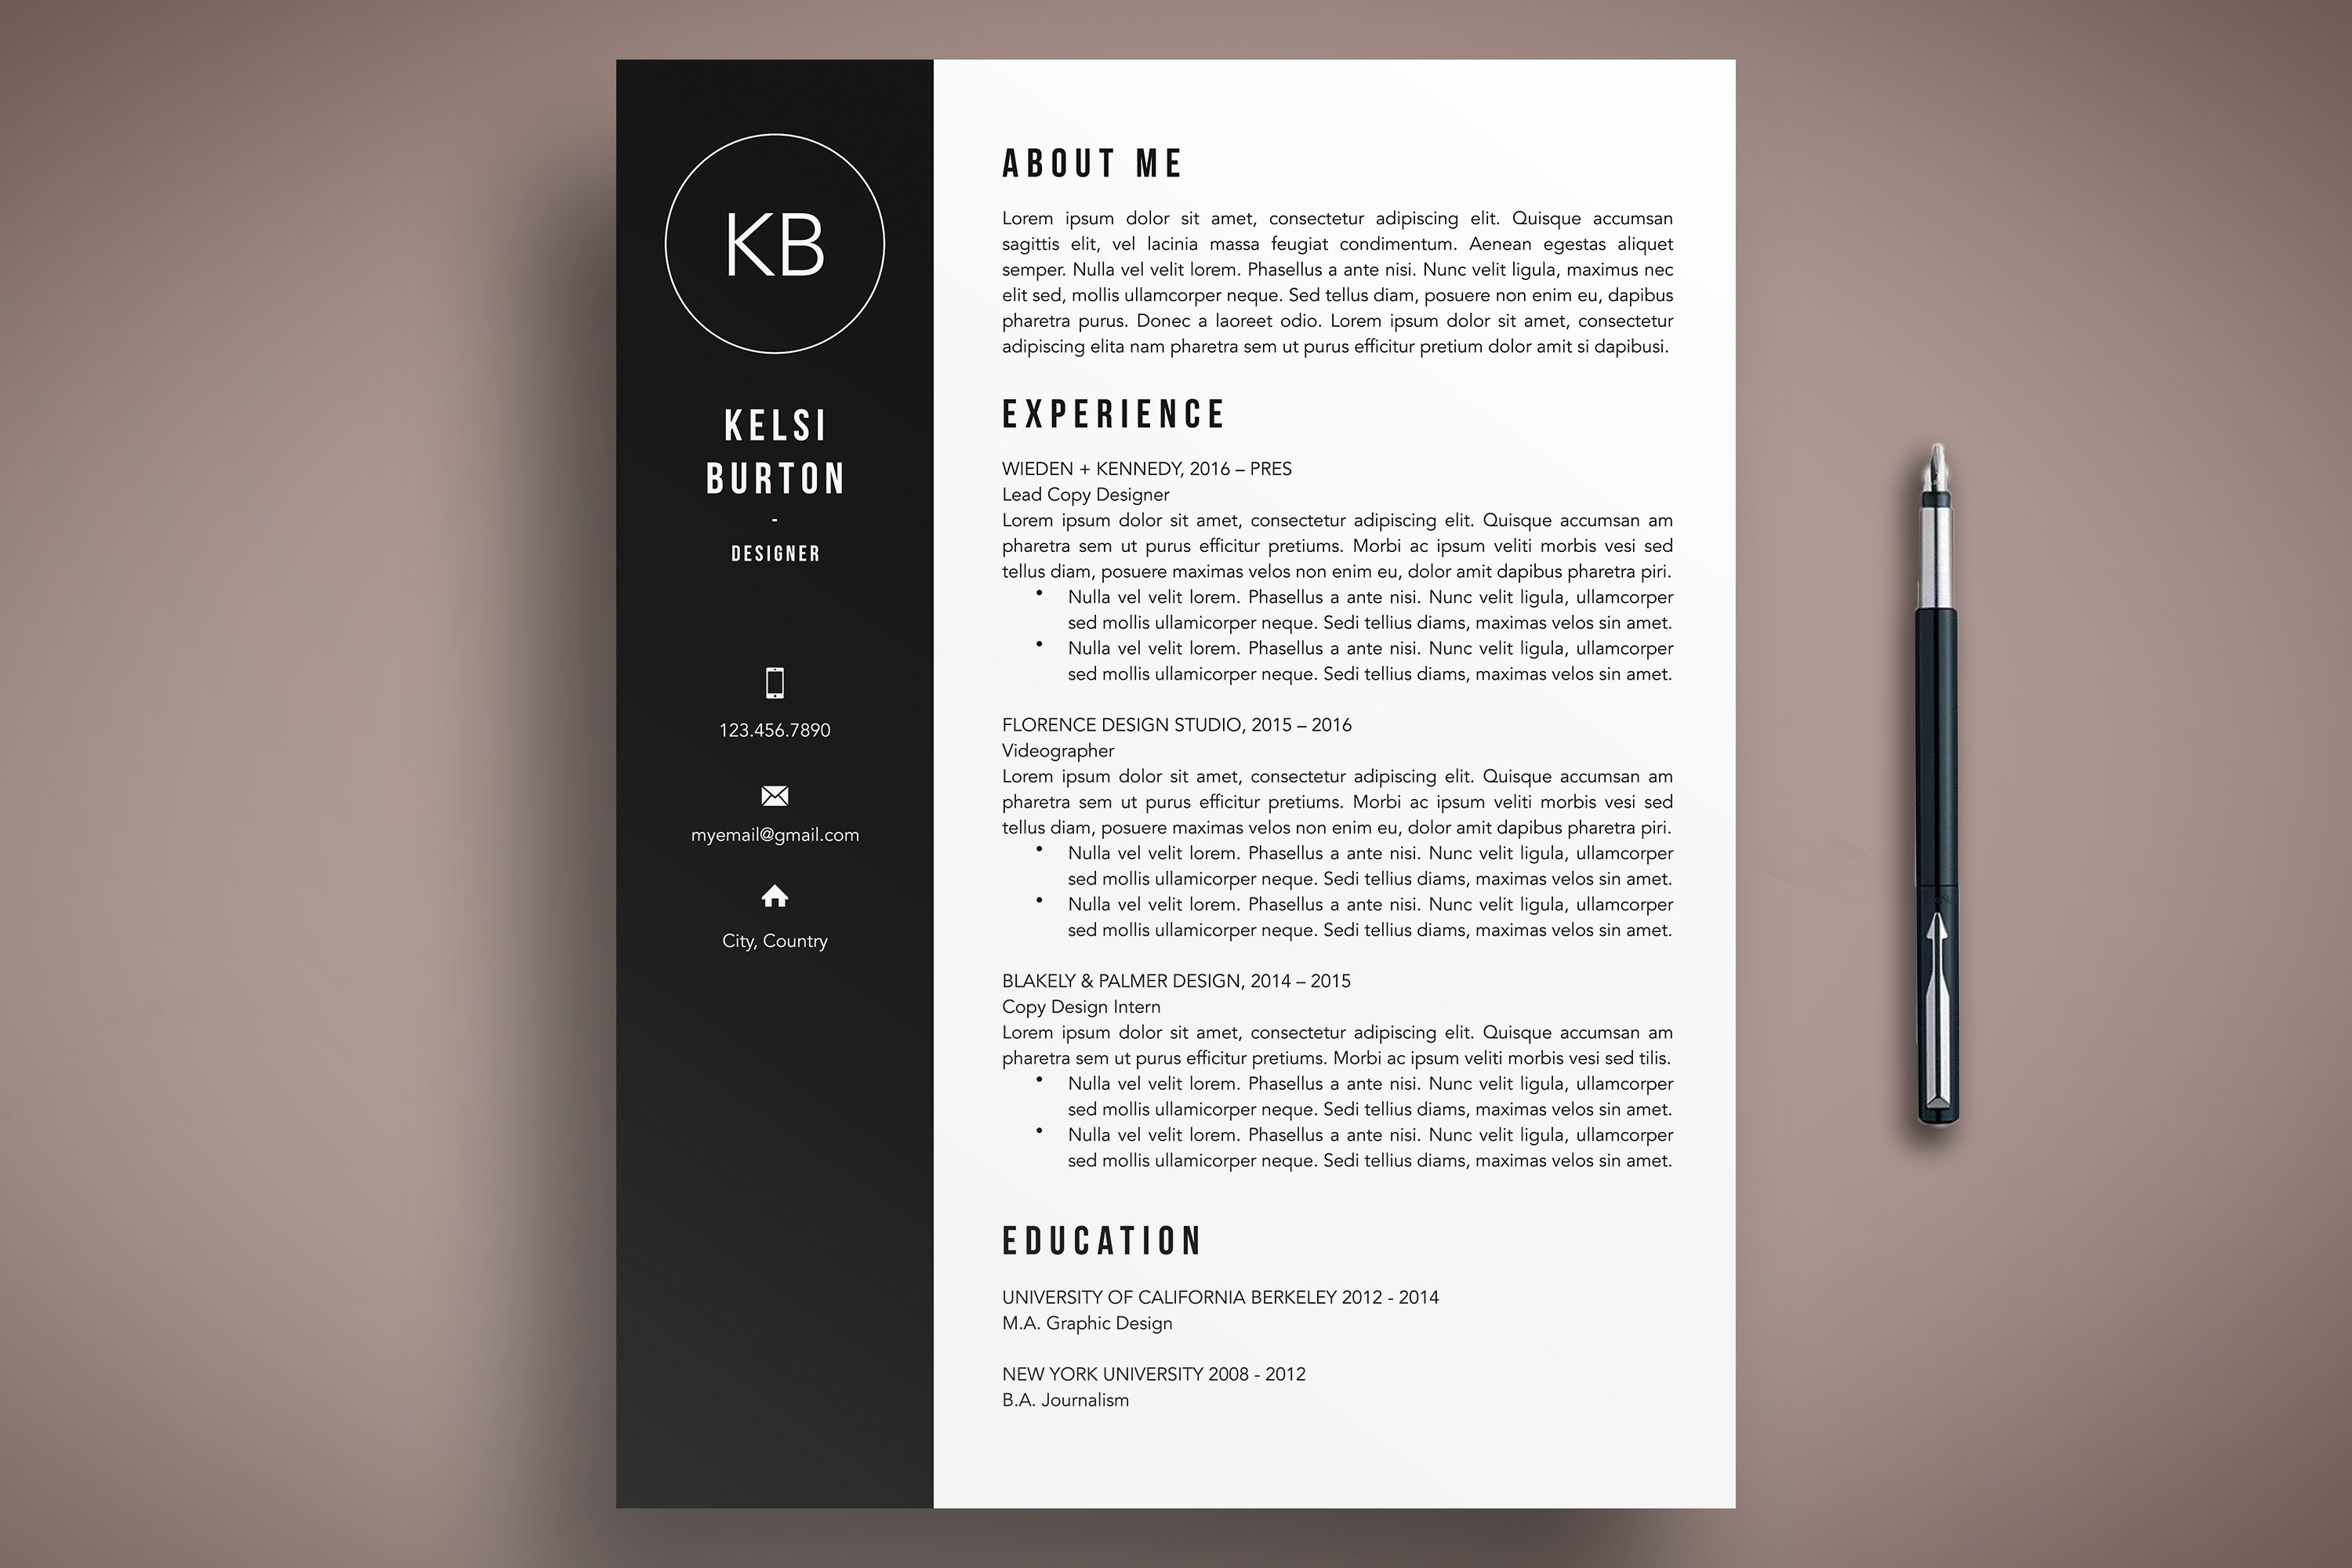 Modern Resume Template CV Word/Pages cover image.